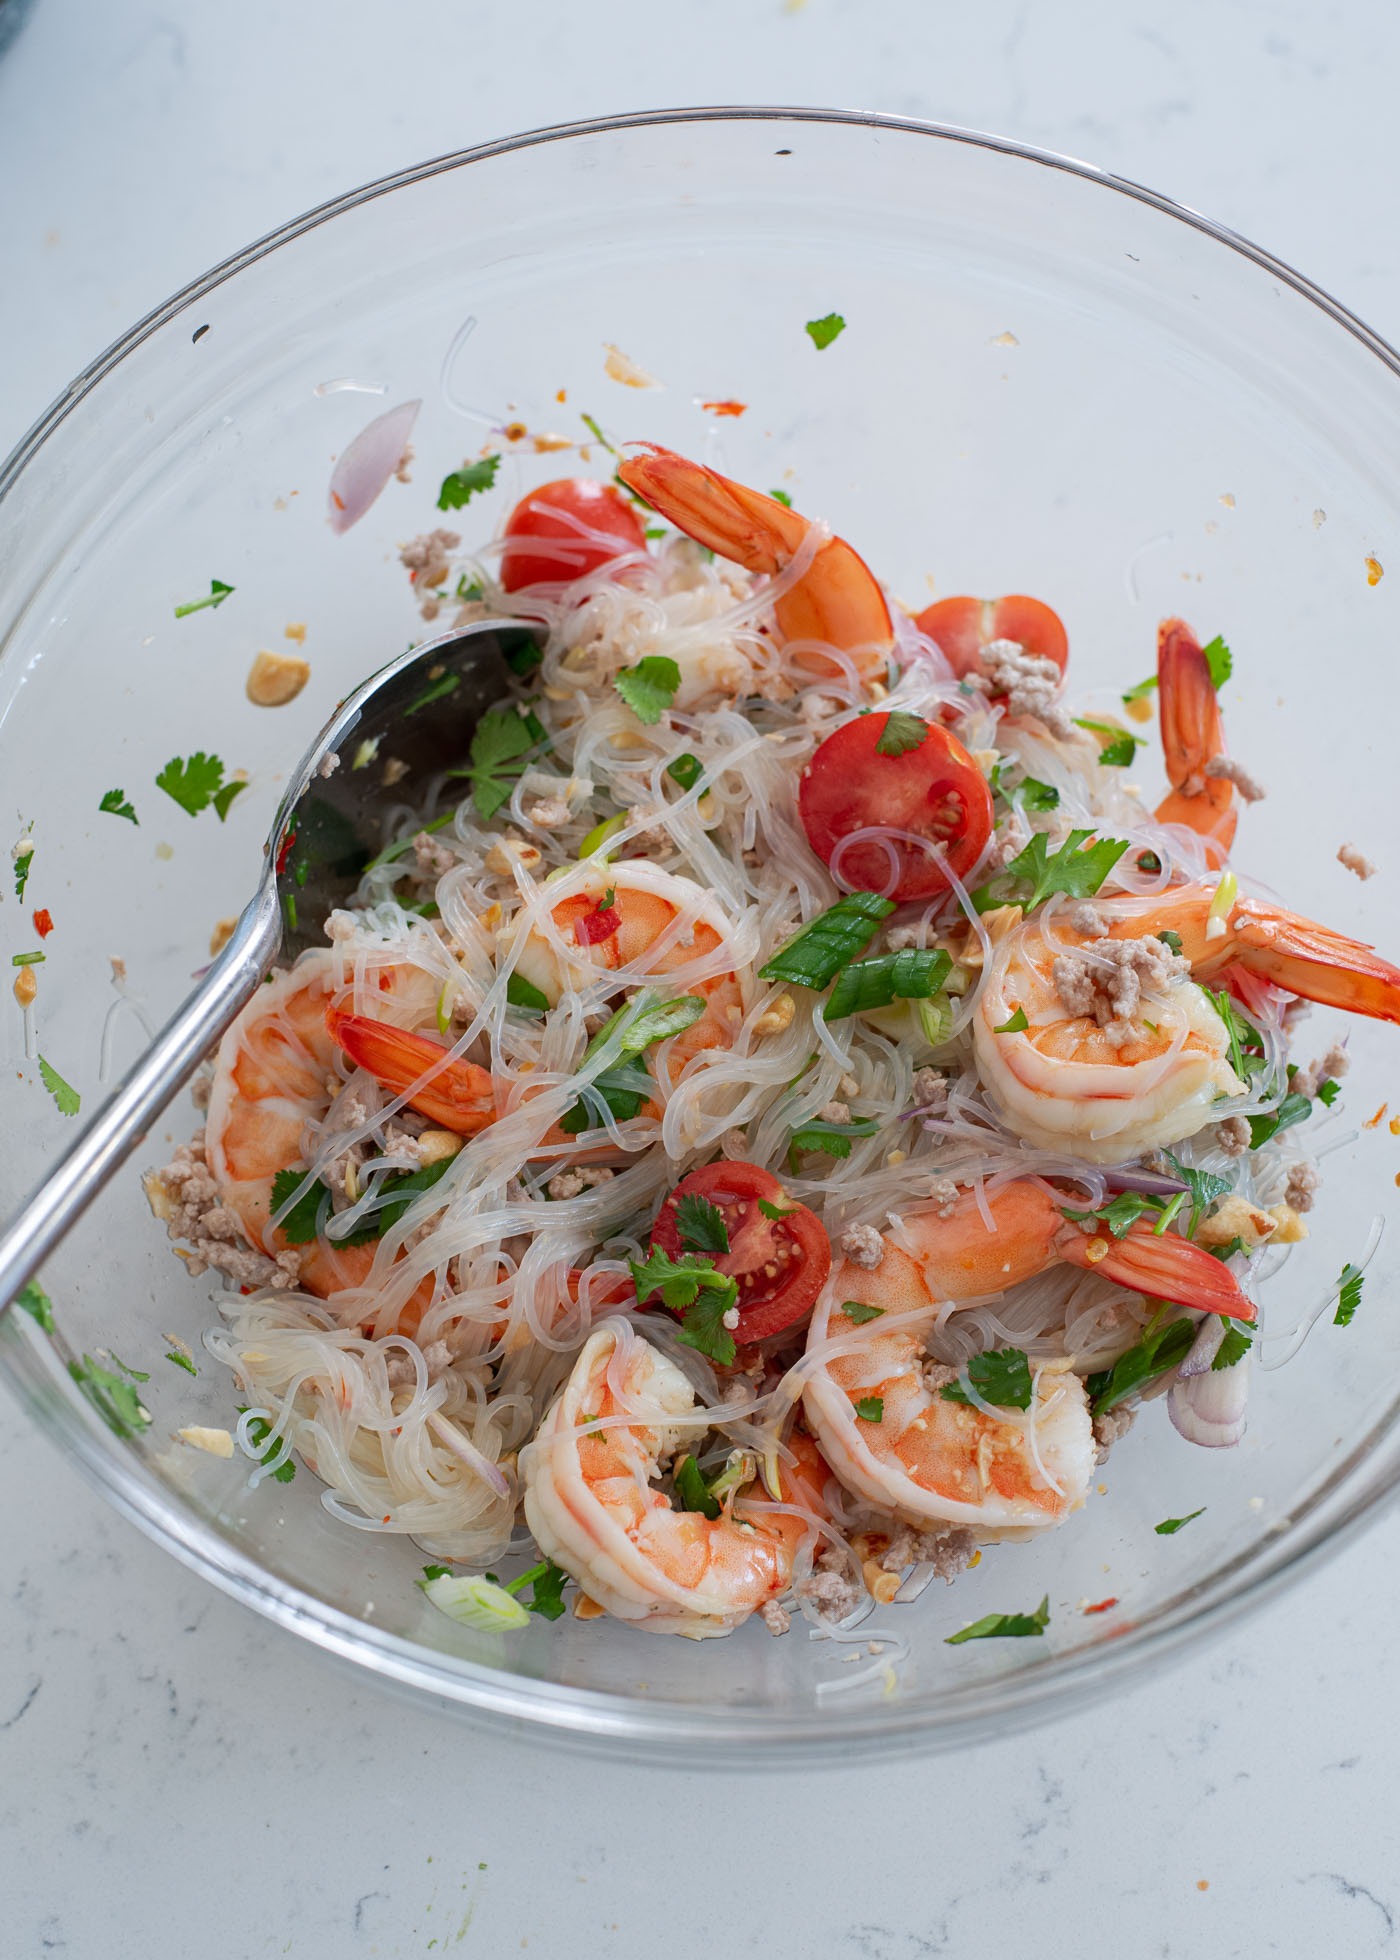 A spoon is tossing shrimp, tomato, glass noodles with a salad dressing in a mixing bowl